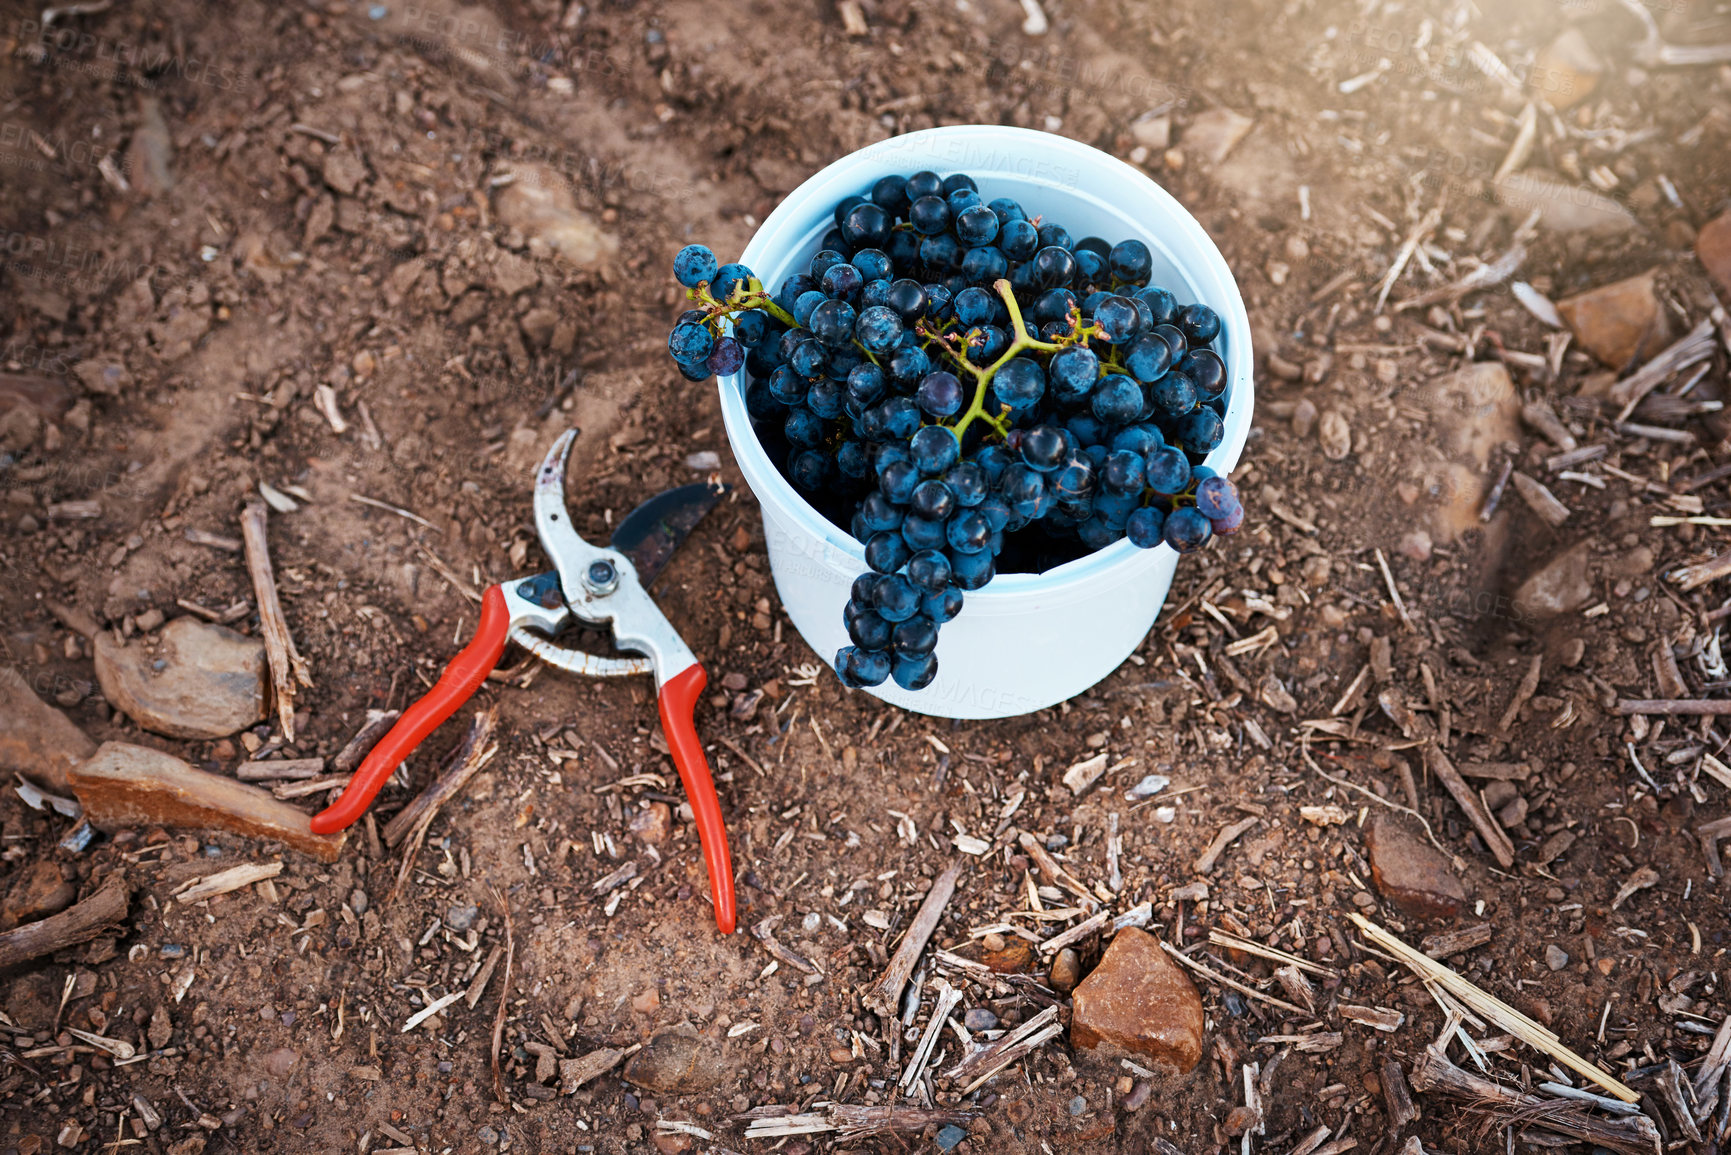 Buy stock photo Still life shot of a grapes in a bucket with a pair of scissors next to it on the ground